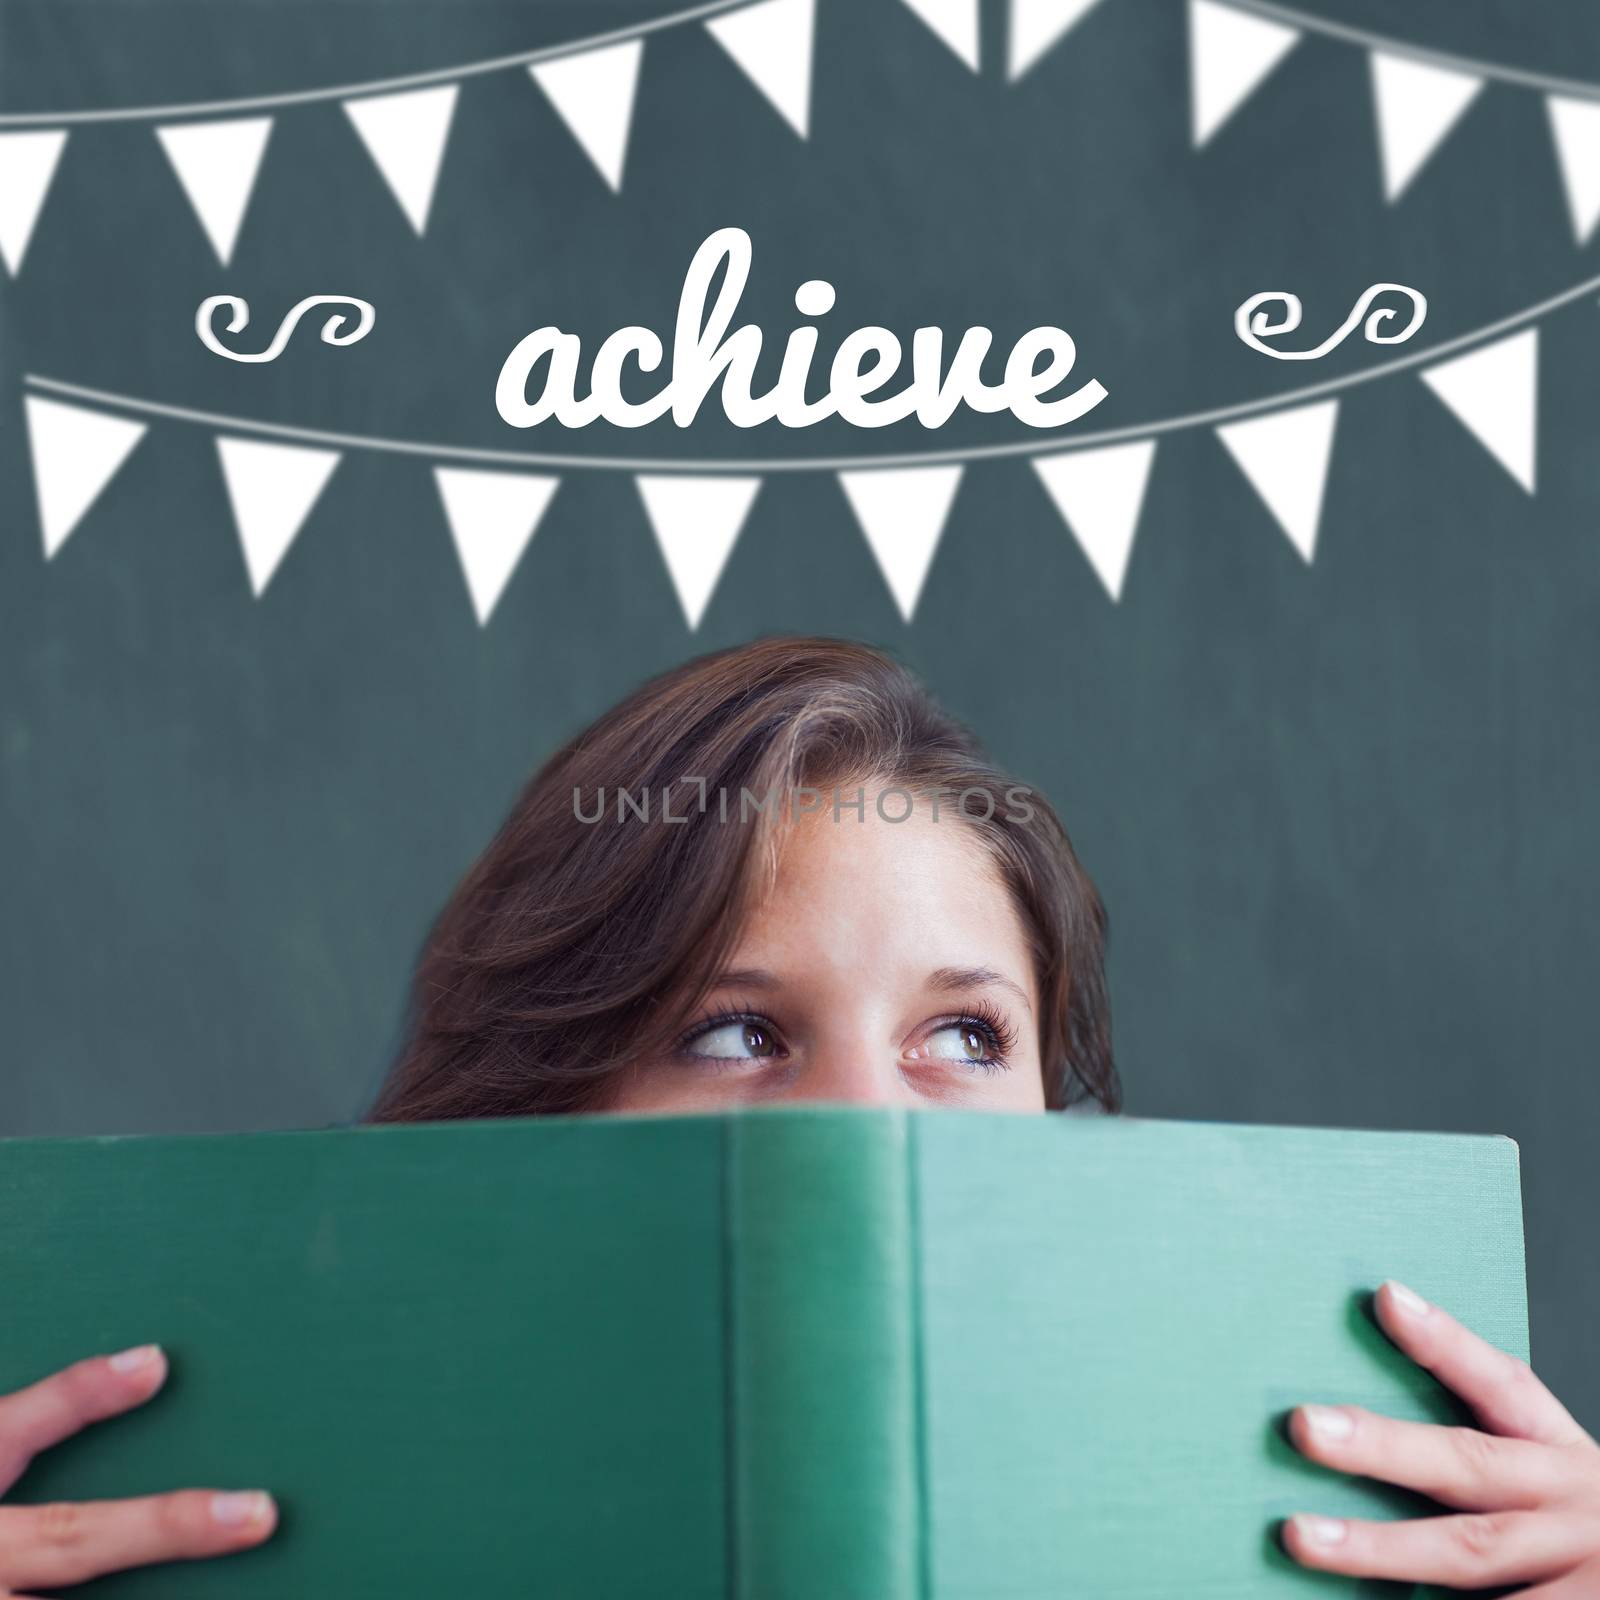 Achieve against student holding book by Wavebreakmedia